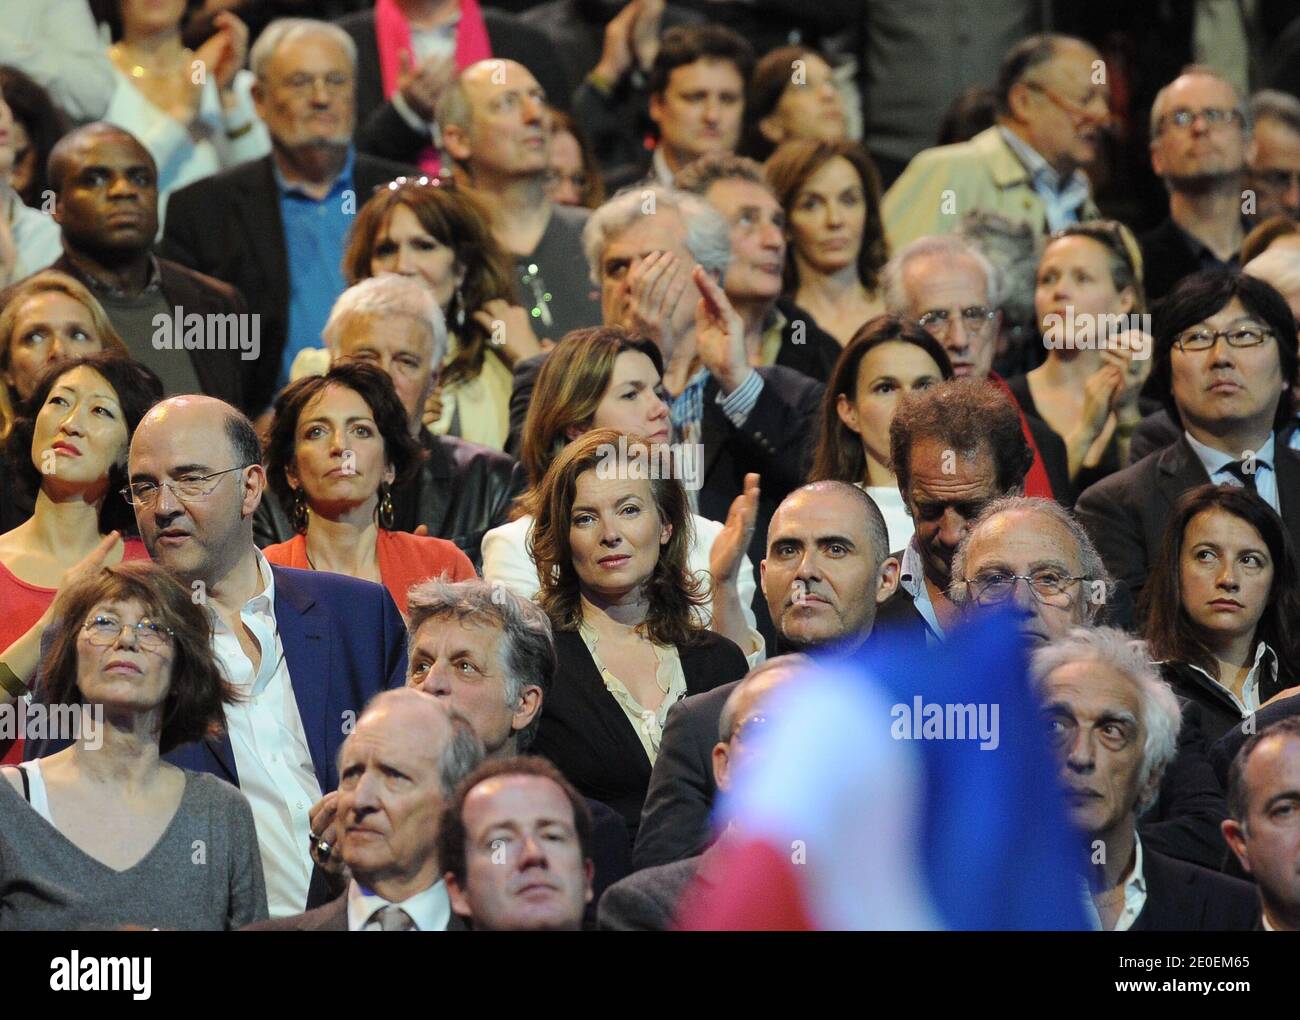 Gerard Darmon, Jane Birkin, Safia Otokore, Pierre Moscovici, Valerie Trierweiler, Vincent Lindon, Cecile Duflot behind Fleur Pellerin, Marisol Touraine, Aurelie Filippettit and Jean-Vincent Place are pictured during France's opposition Socialist Party (PS) candidate for the 2012 French Presidential election Francois Hollande's campaign meeting at the Palais Omnisports Paris-Bercy (POPB) in Paris, France on April 29, 2012. Photo by Mousse/ABACAPRESS.COM Stock Photo